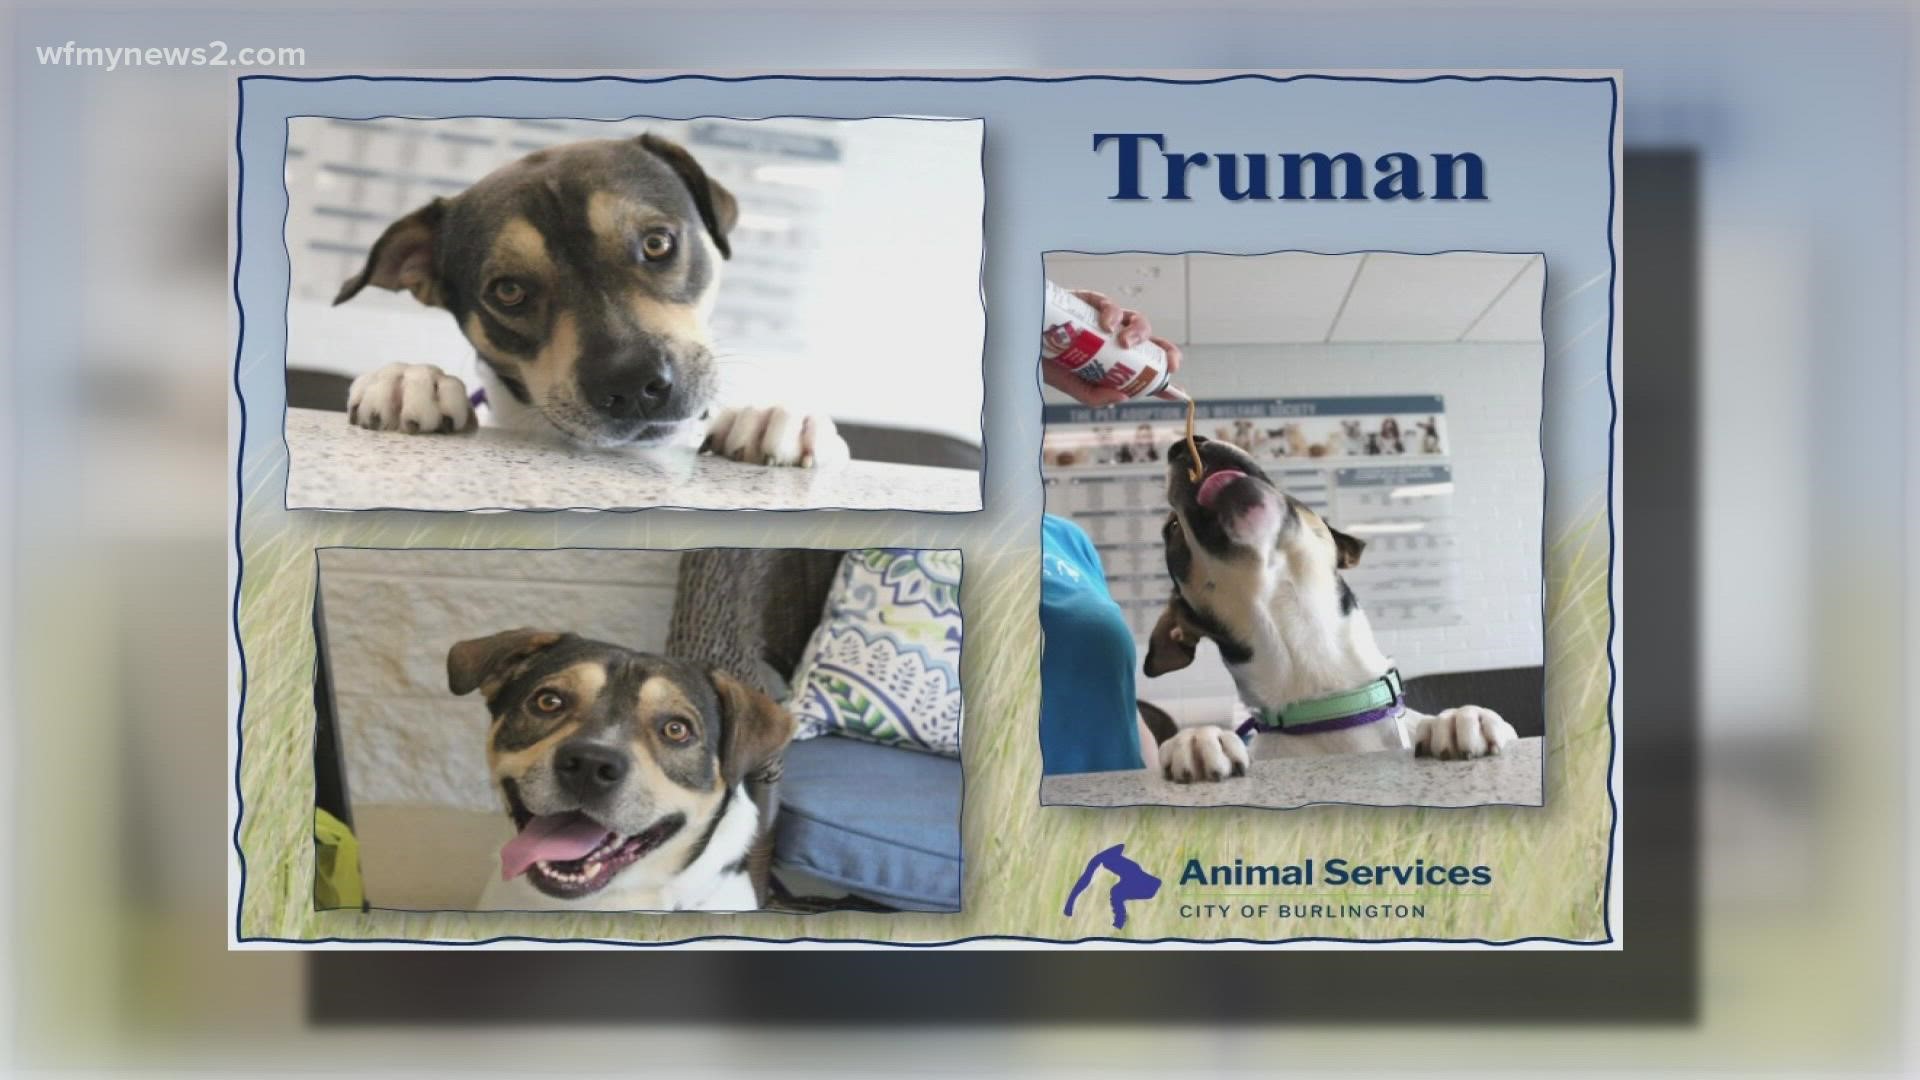 Let's get Truman adopted!